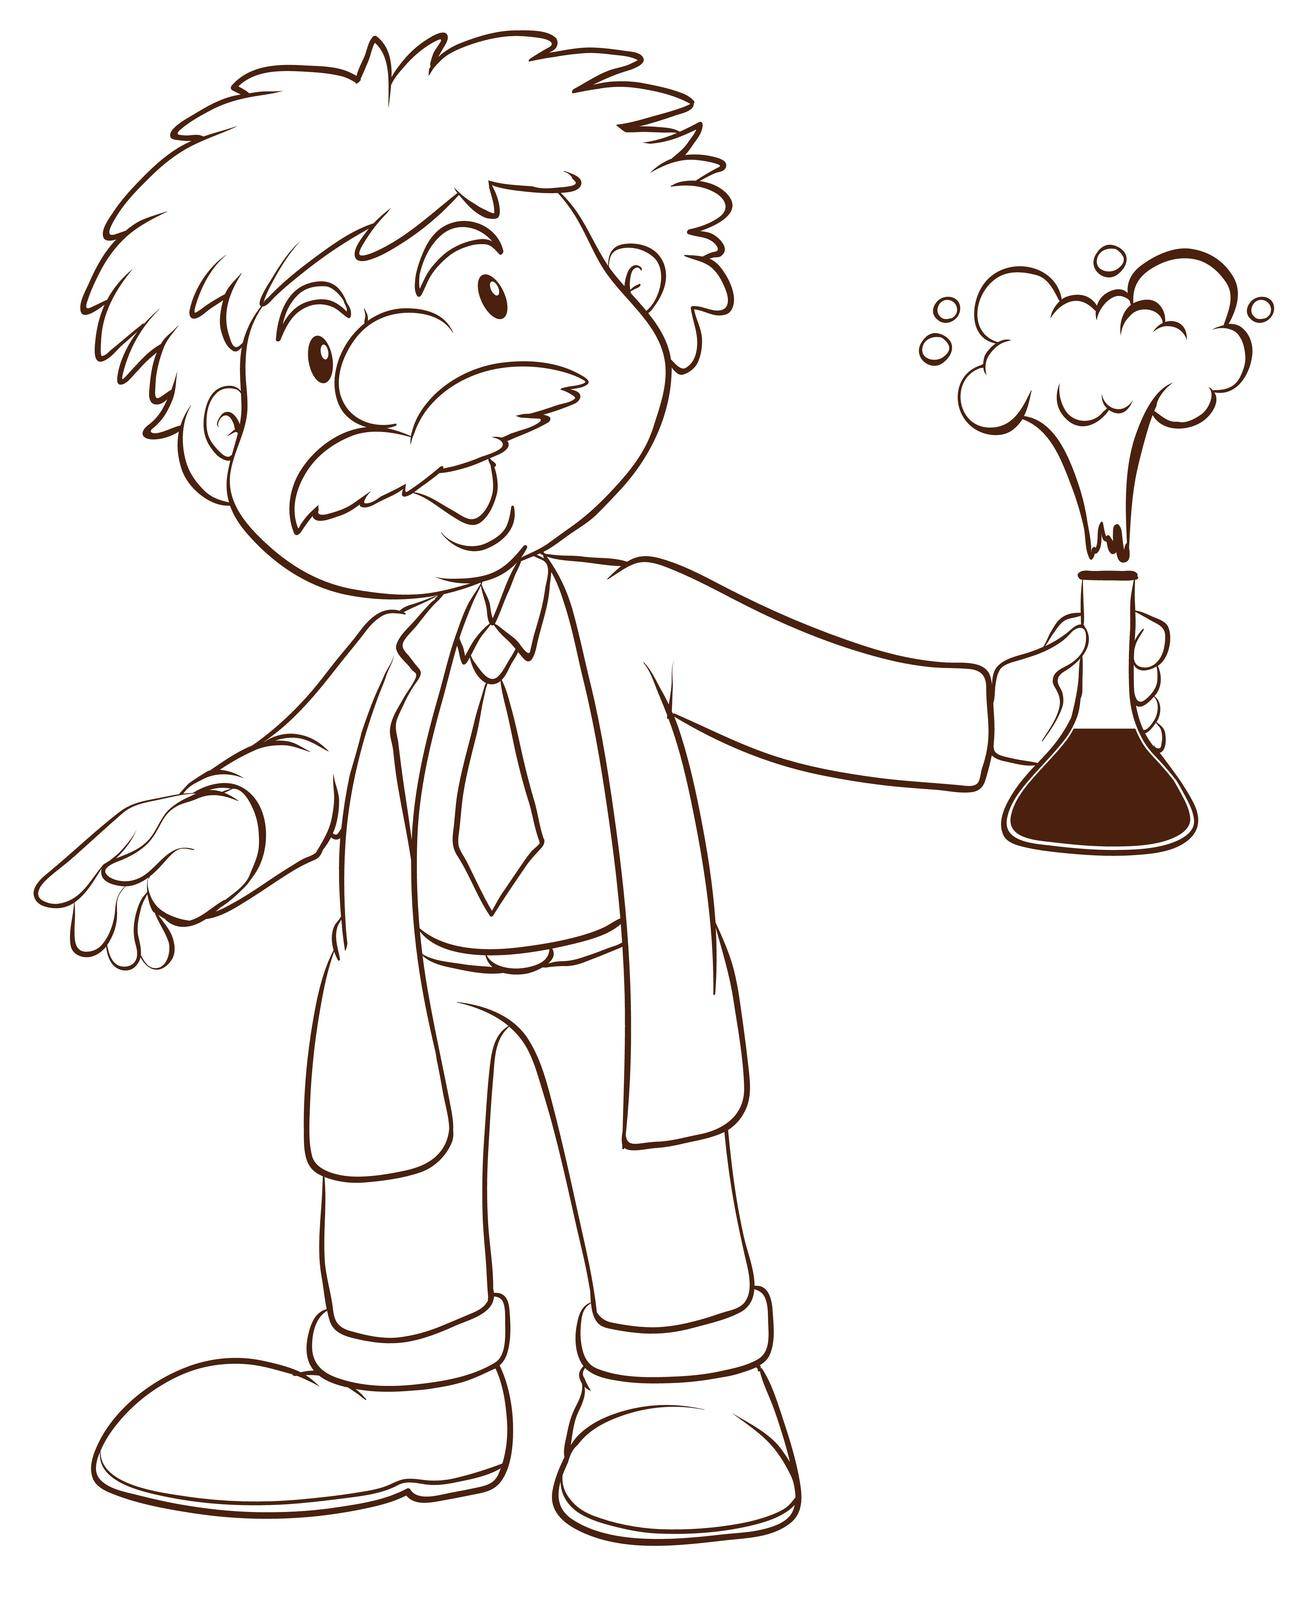 Illustration of a simple sketch of a scientist on a white background